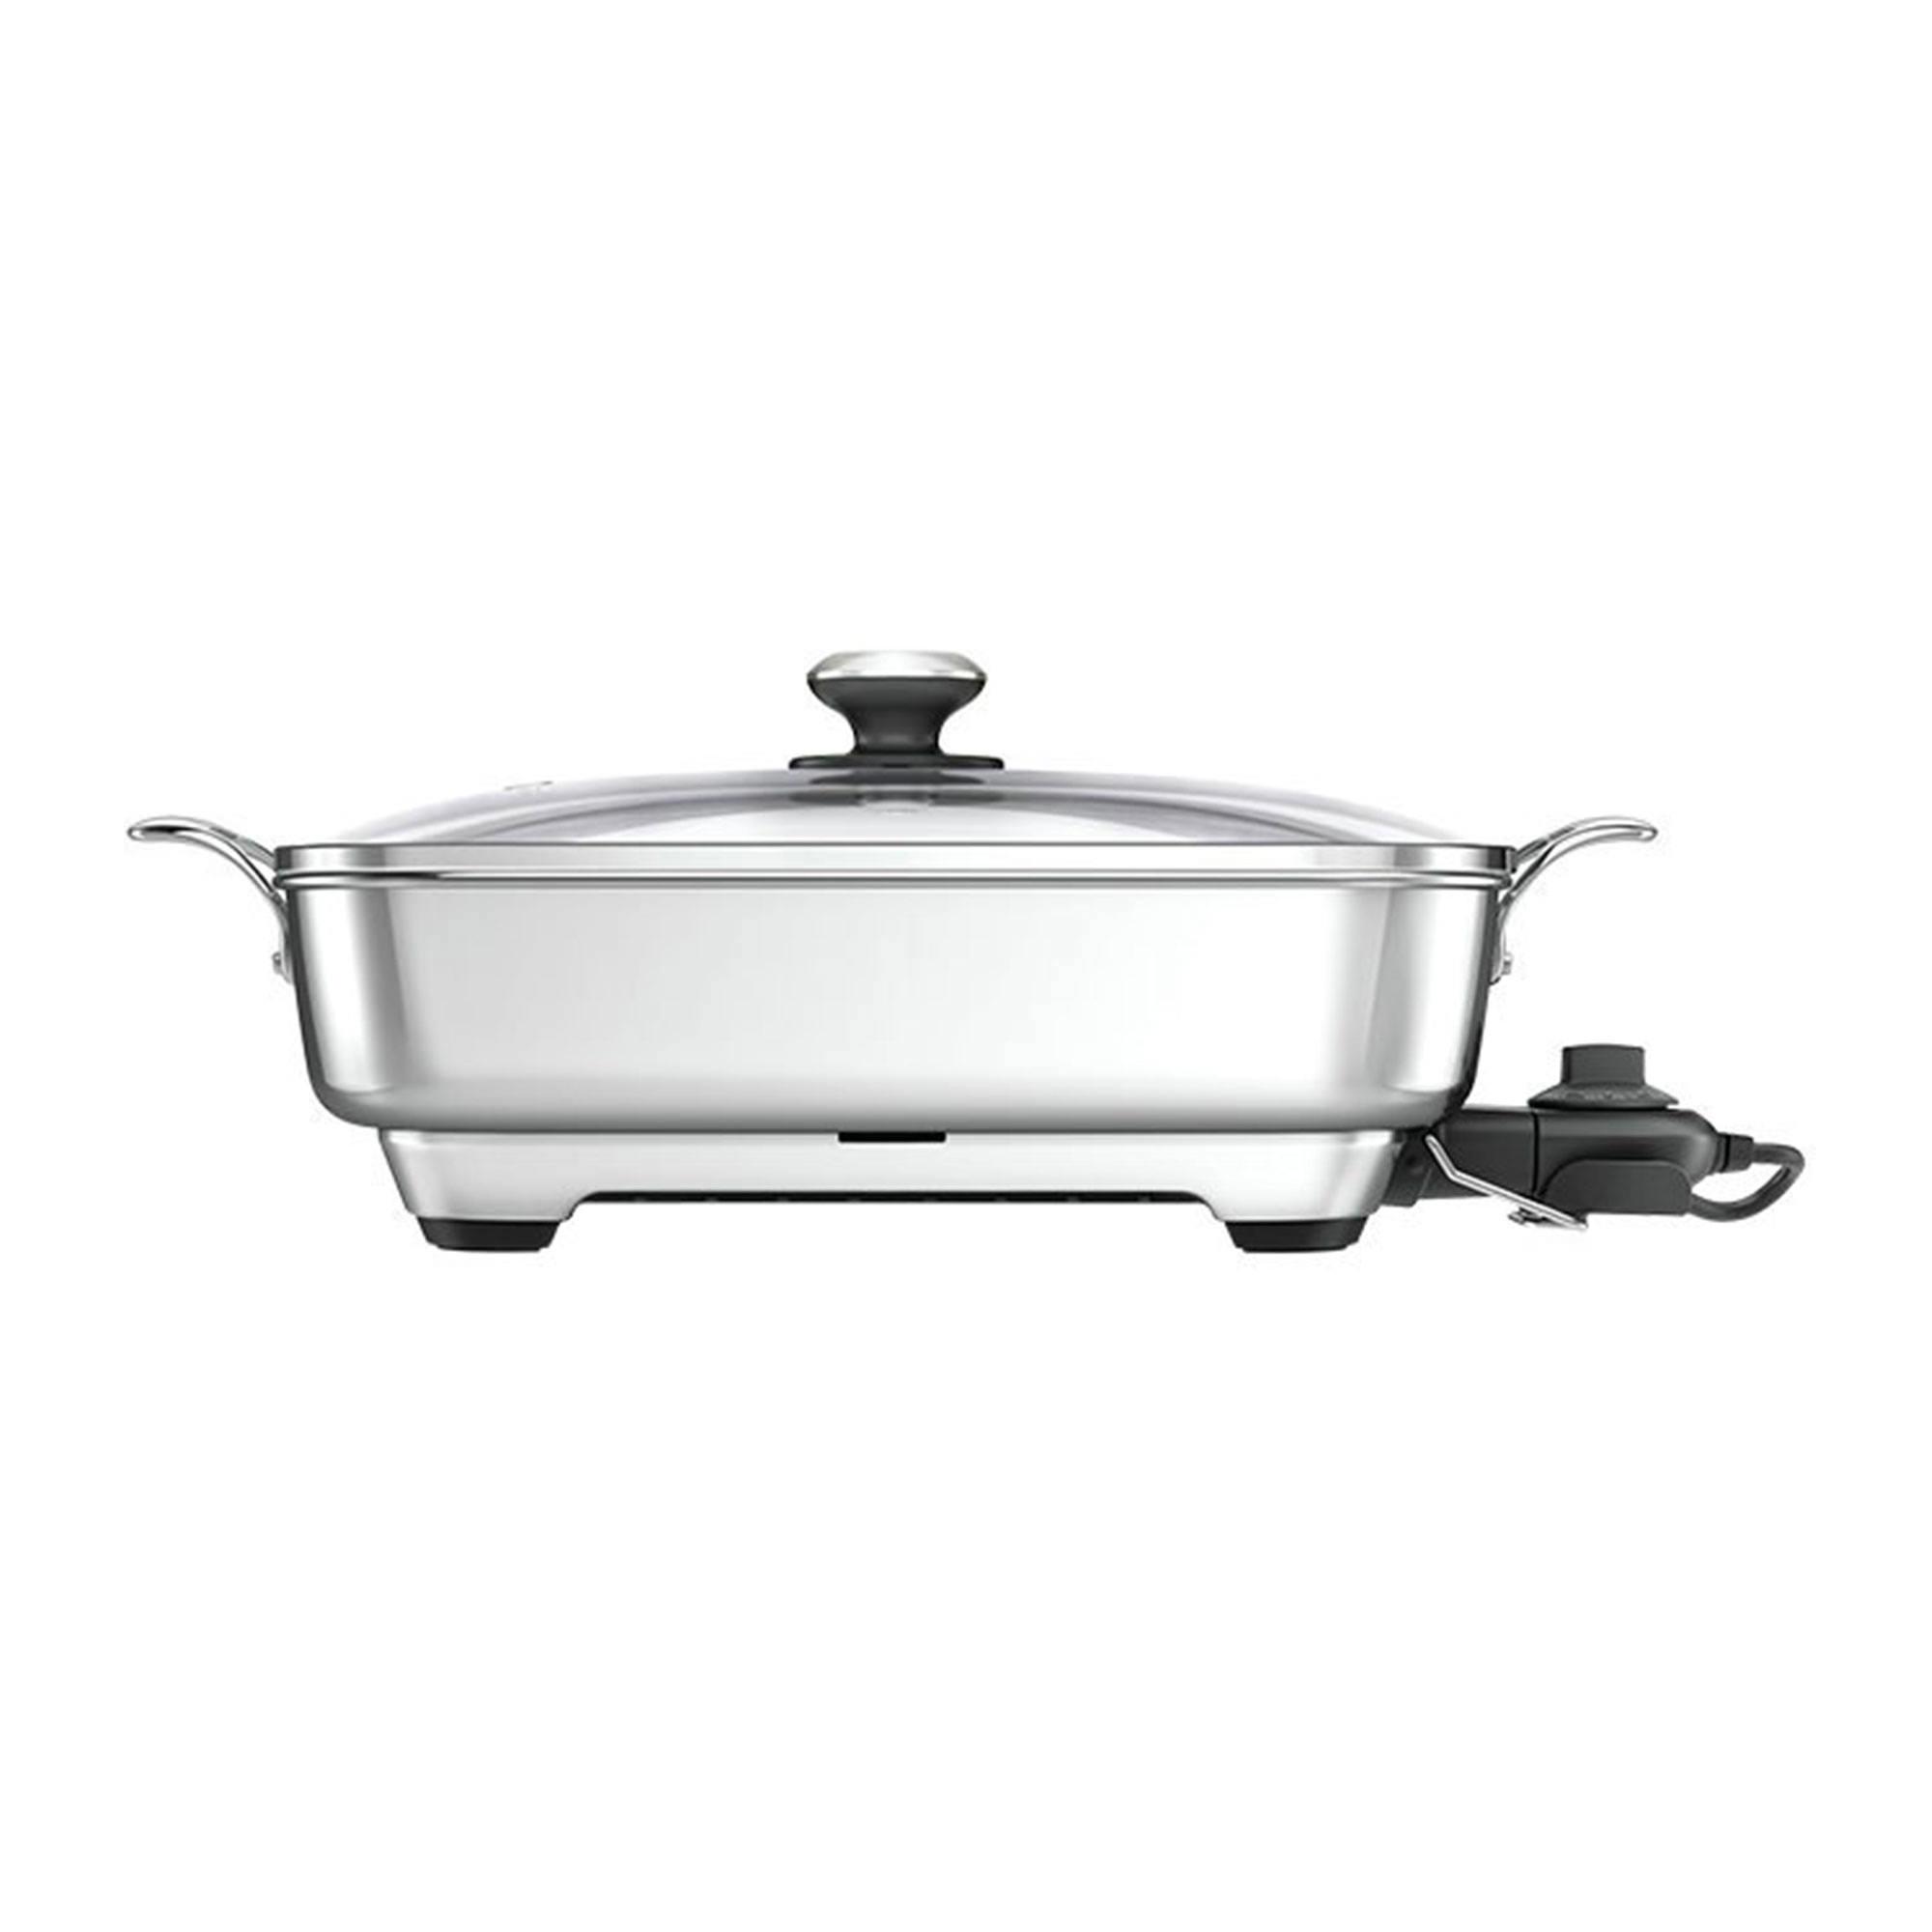 Breville Thermal Pro Electric Frypan Stainless Steel 50x30.8cm Image 1